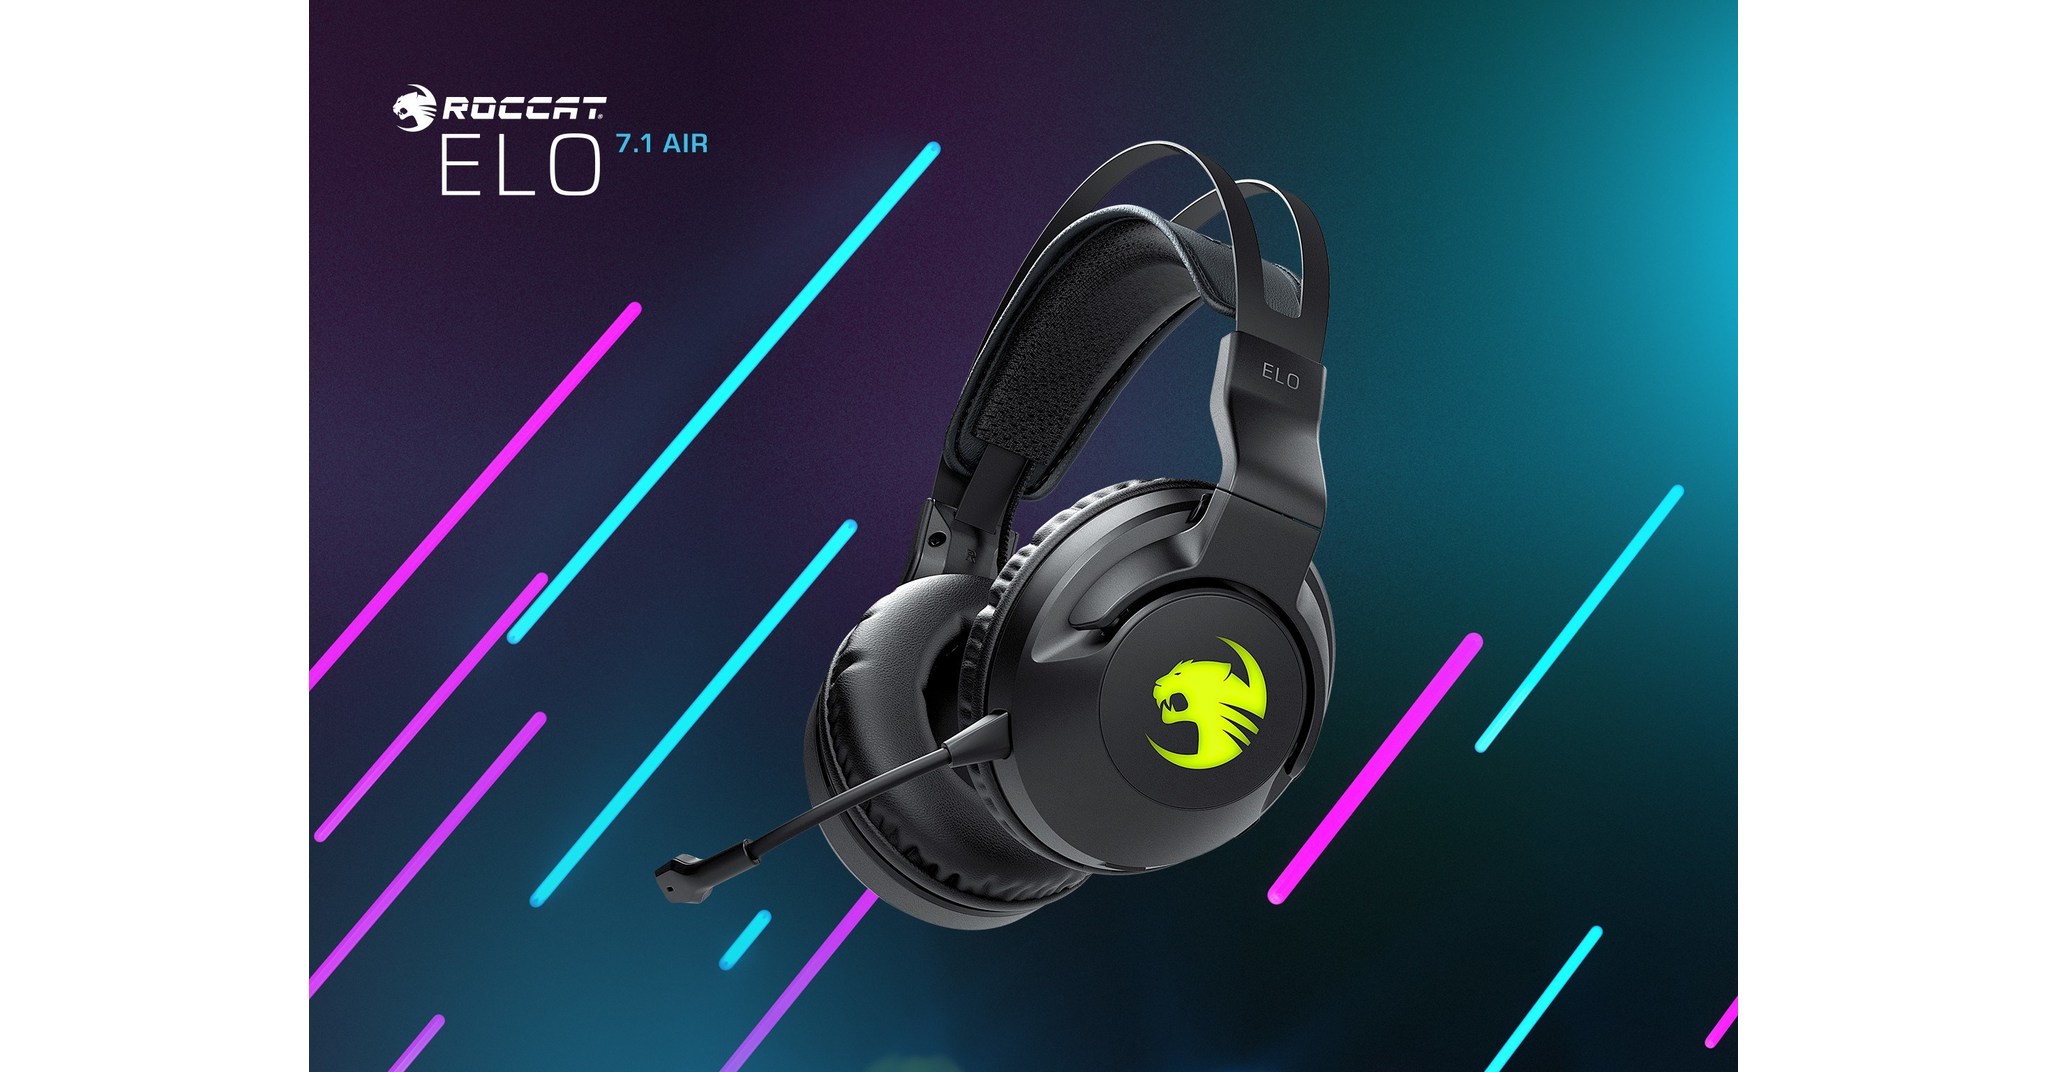  ROCCAT Elo 7.1 Air PC Wireless Gaming Headset